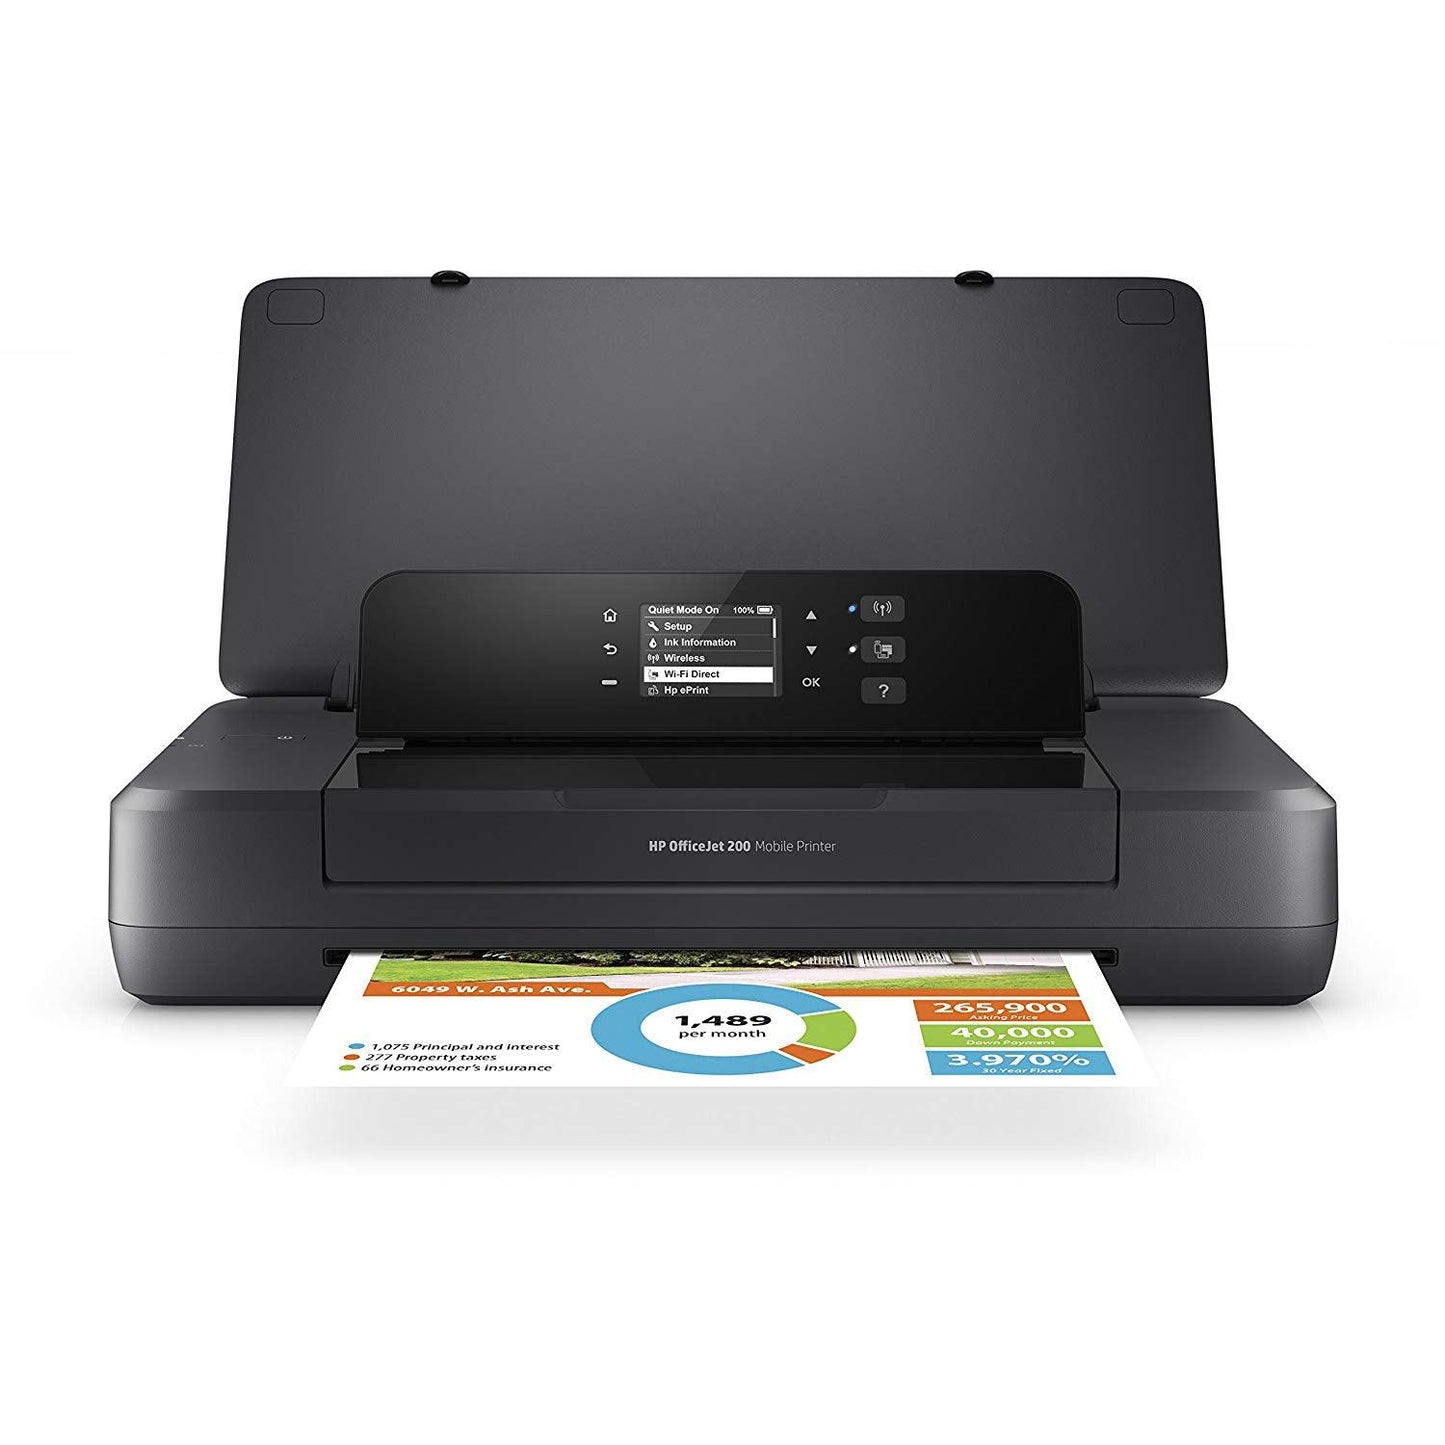 Hp Officejet 200 Portable Printer With Wireless & Mobile Printing (Cz993A)